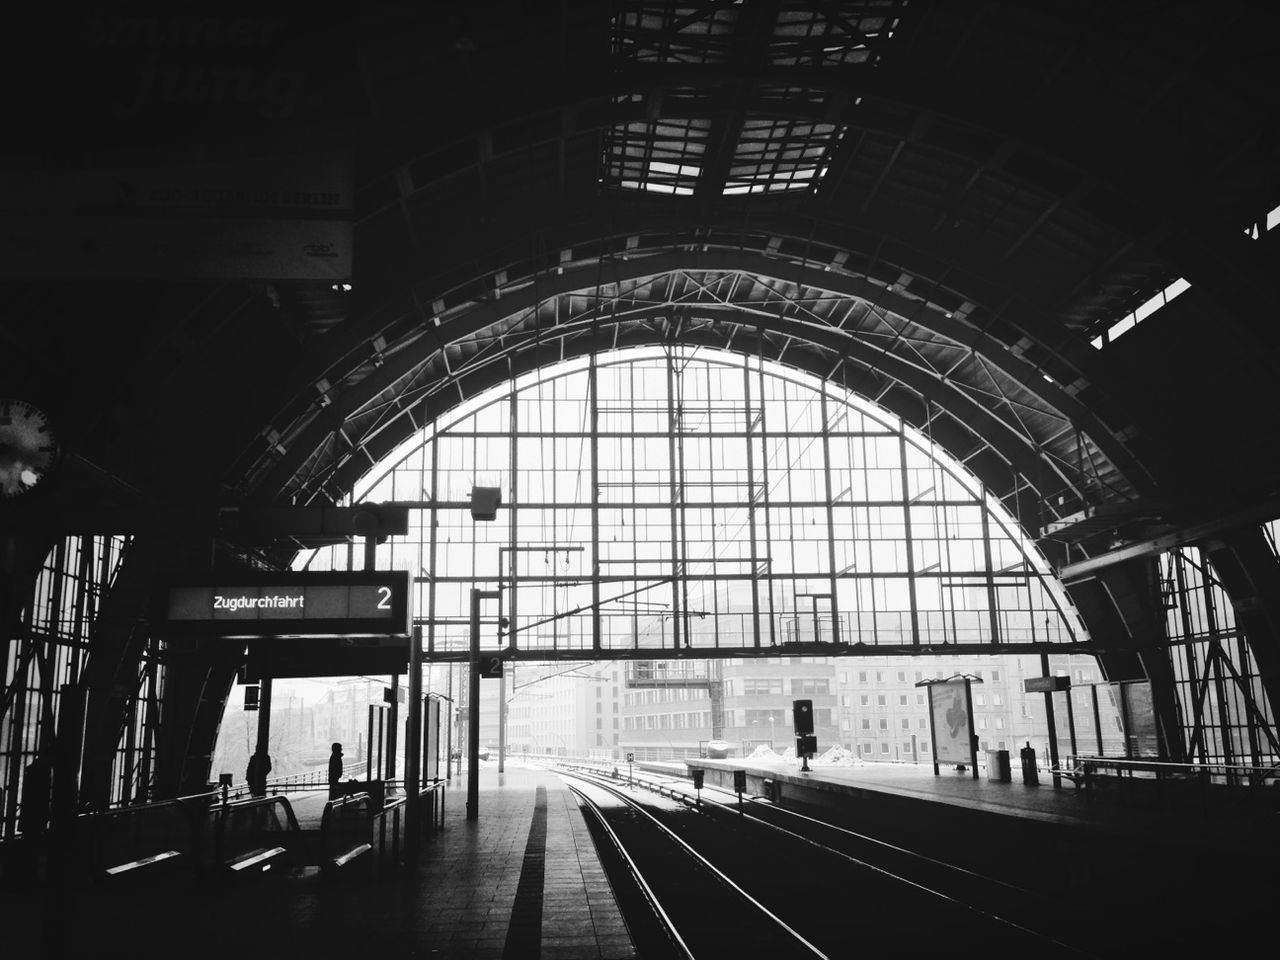 indoors, architecture, transportation, built structure, ceiling, arch, railroad station, the way forward, public transportation, rail transportation, railroad station platform, tunnel, interior, railroad track, mode of transport, diminishing perspective, railing, incidental people, empty, travel